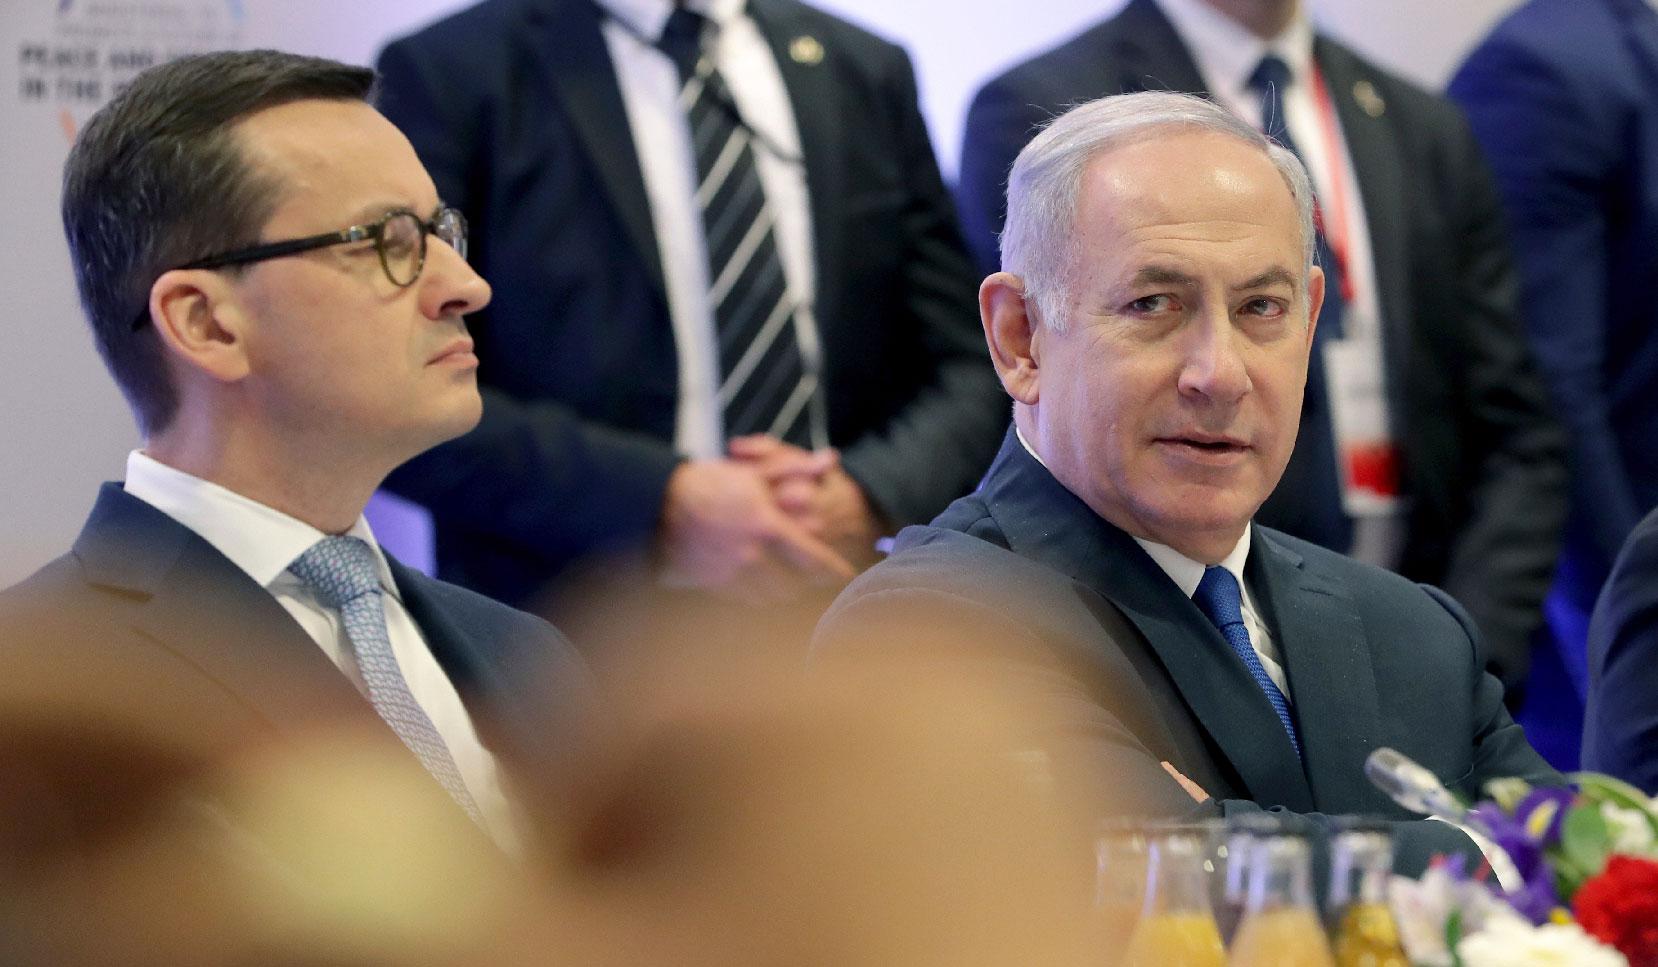 Feb. 14, 2019 photo shows Poland's Prime Minister Mateusz Morawiecki, left, and Israeli Prime Minister Benjamin Netanyahu, right, attend a meeting in Warsaw, Poland.